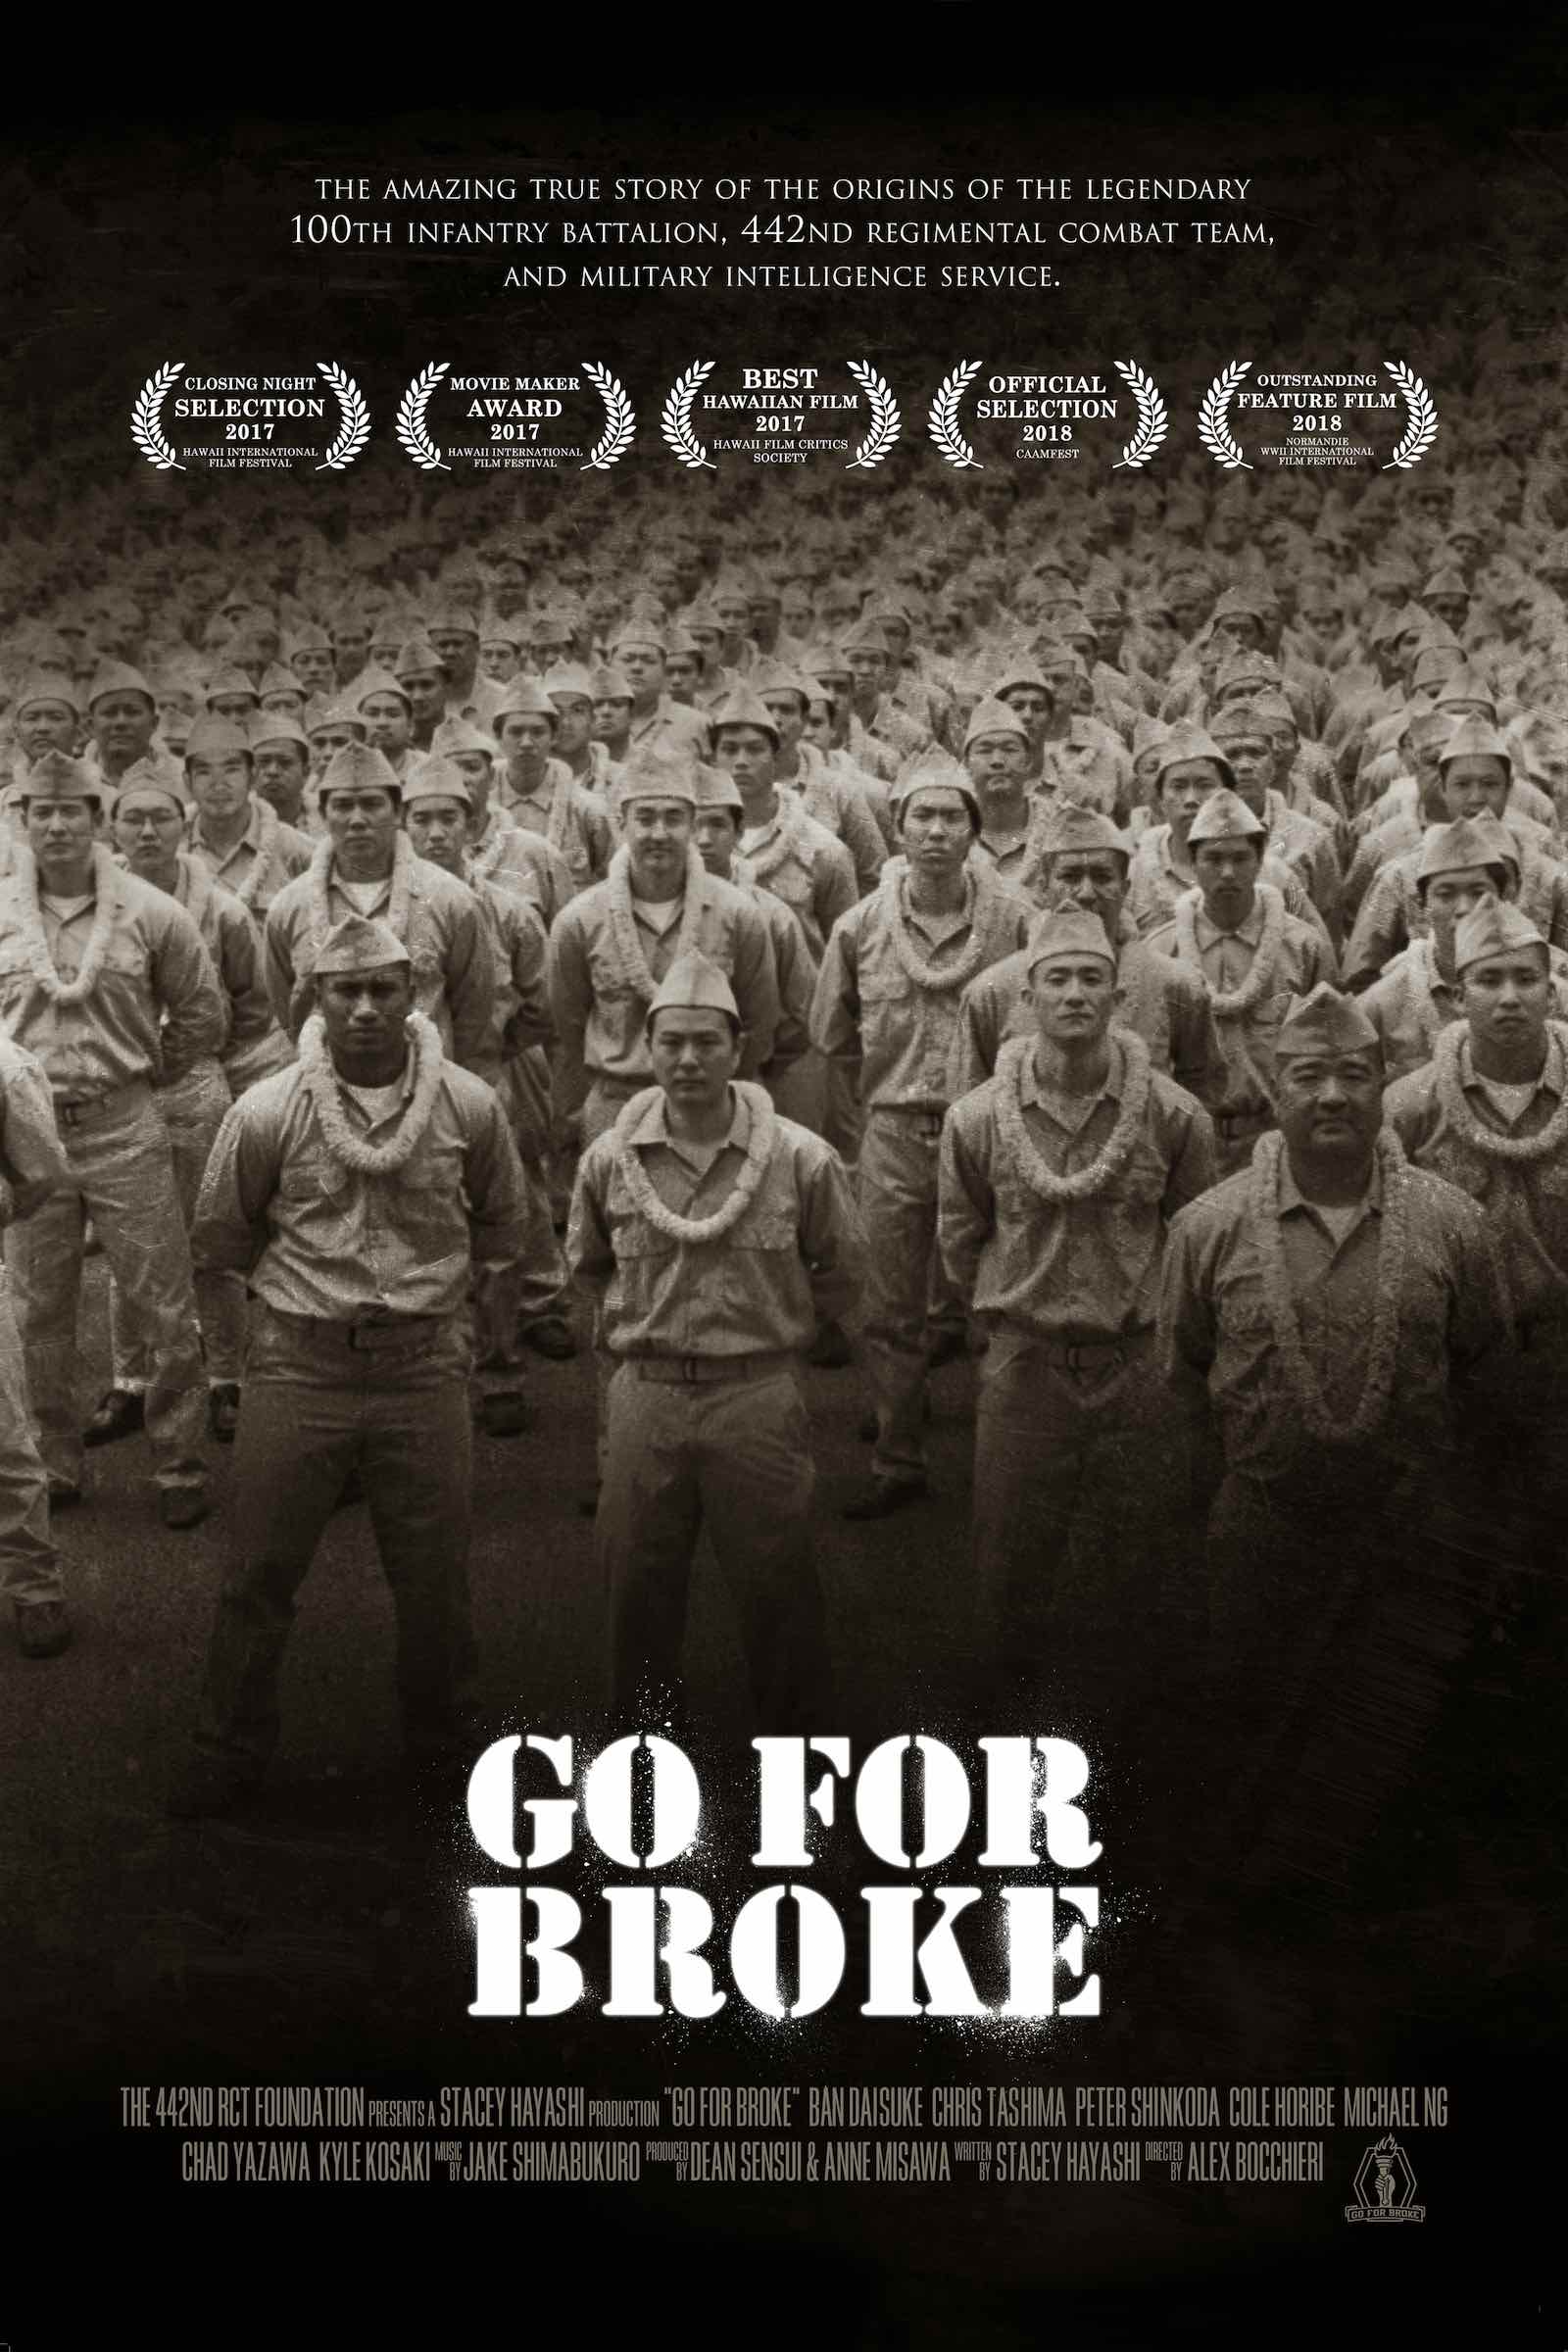 'Go for Broke: An Origin Story' chronicles the story of Hawaii's 100th Infantry Battalion, 442nd Regimental Combat Team, formed in 1941.